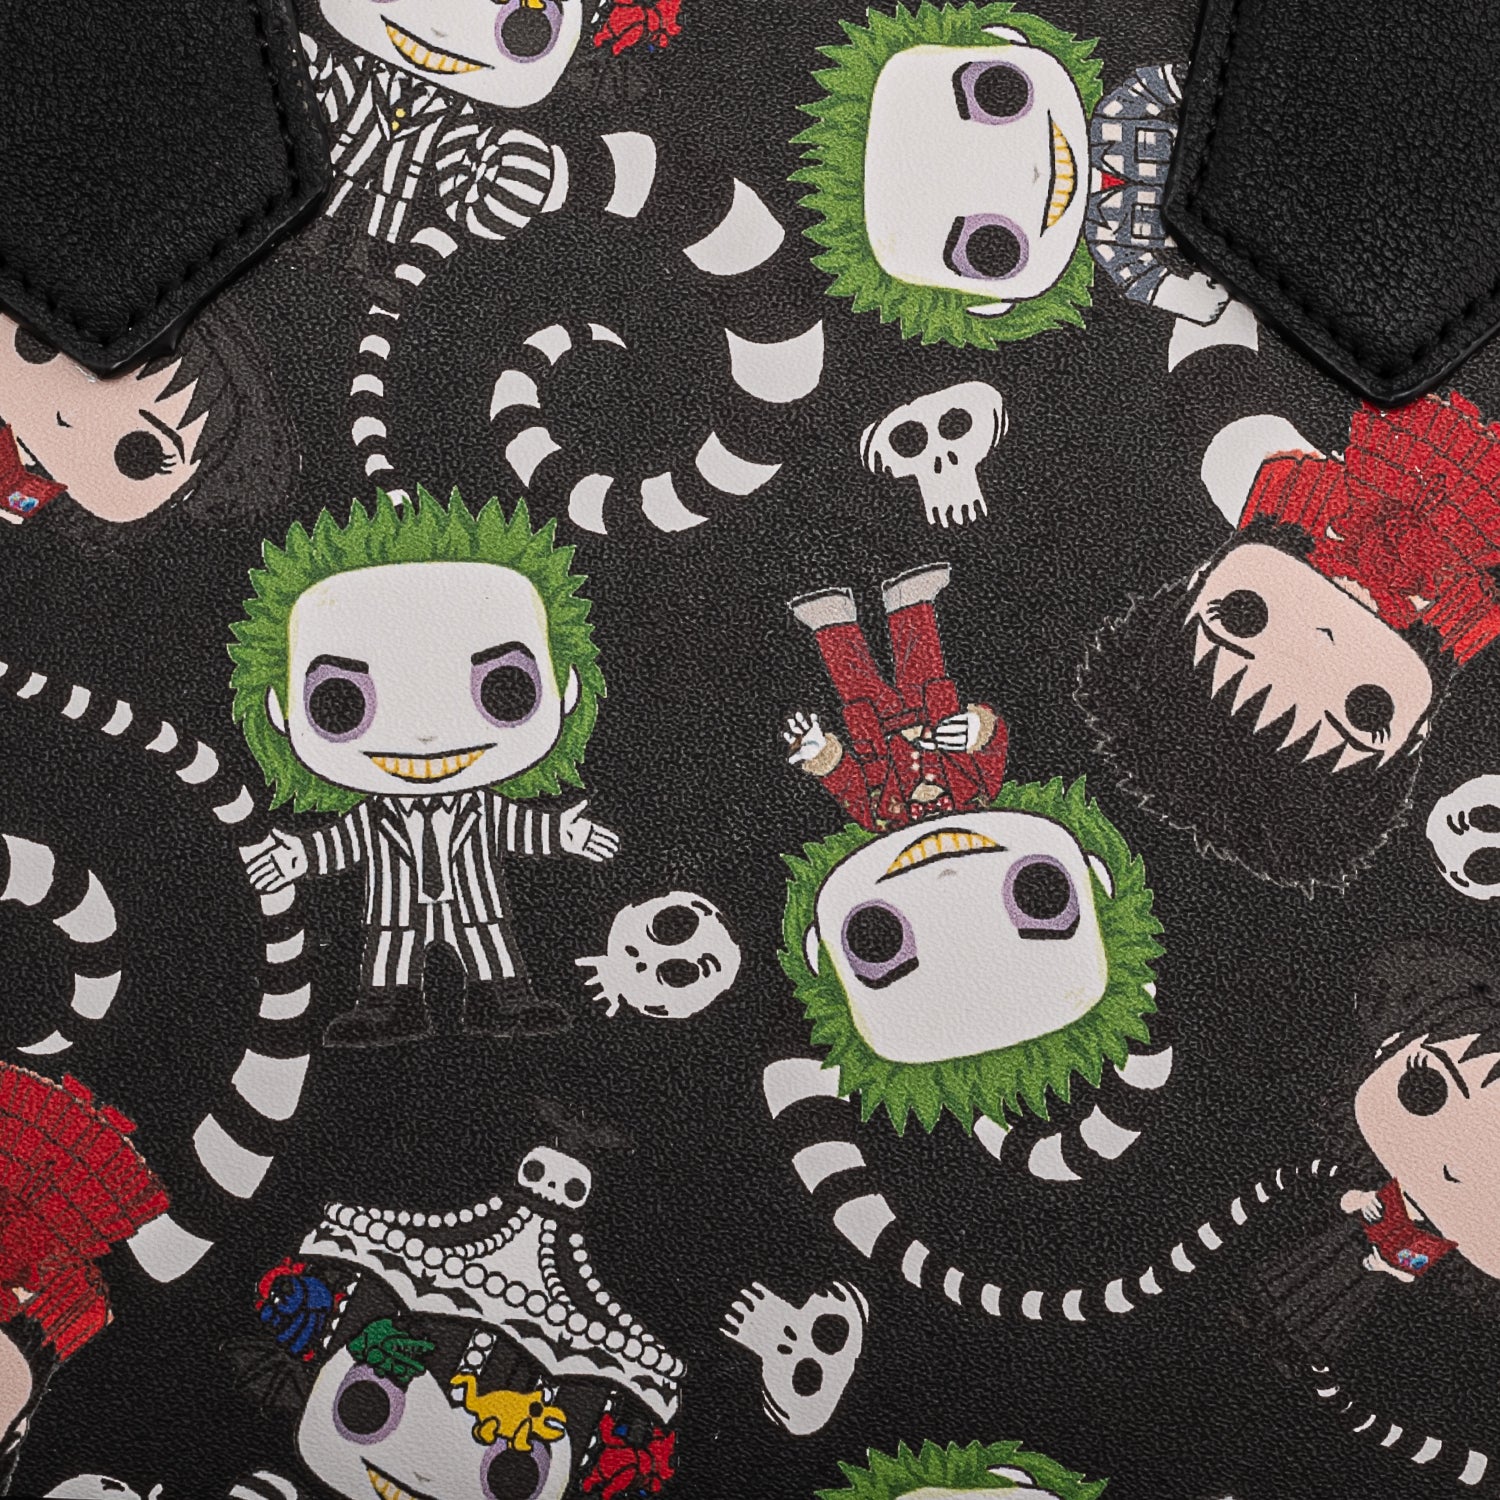 Beetlejuice | Pop by Loungefly Beetlejuice All Over Print Crossbody